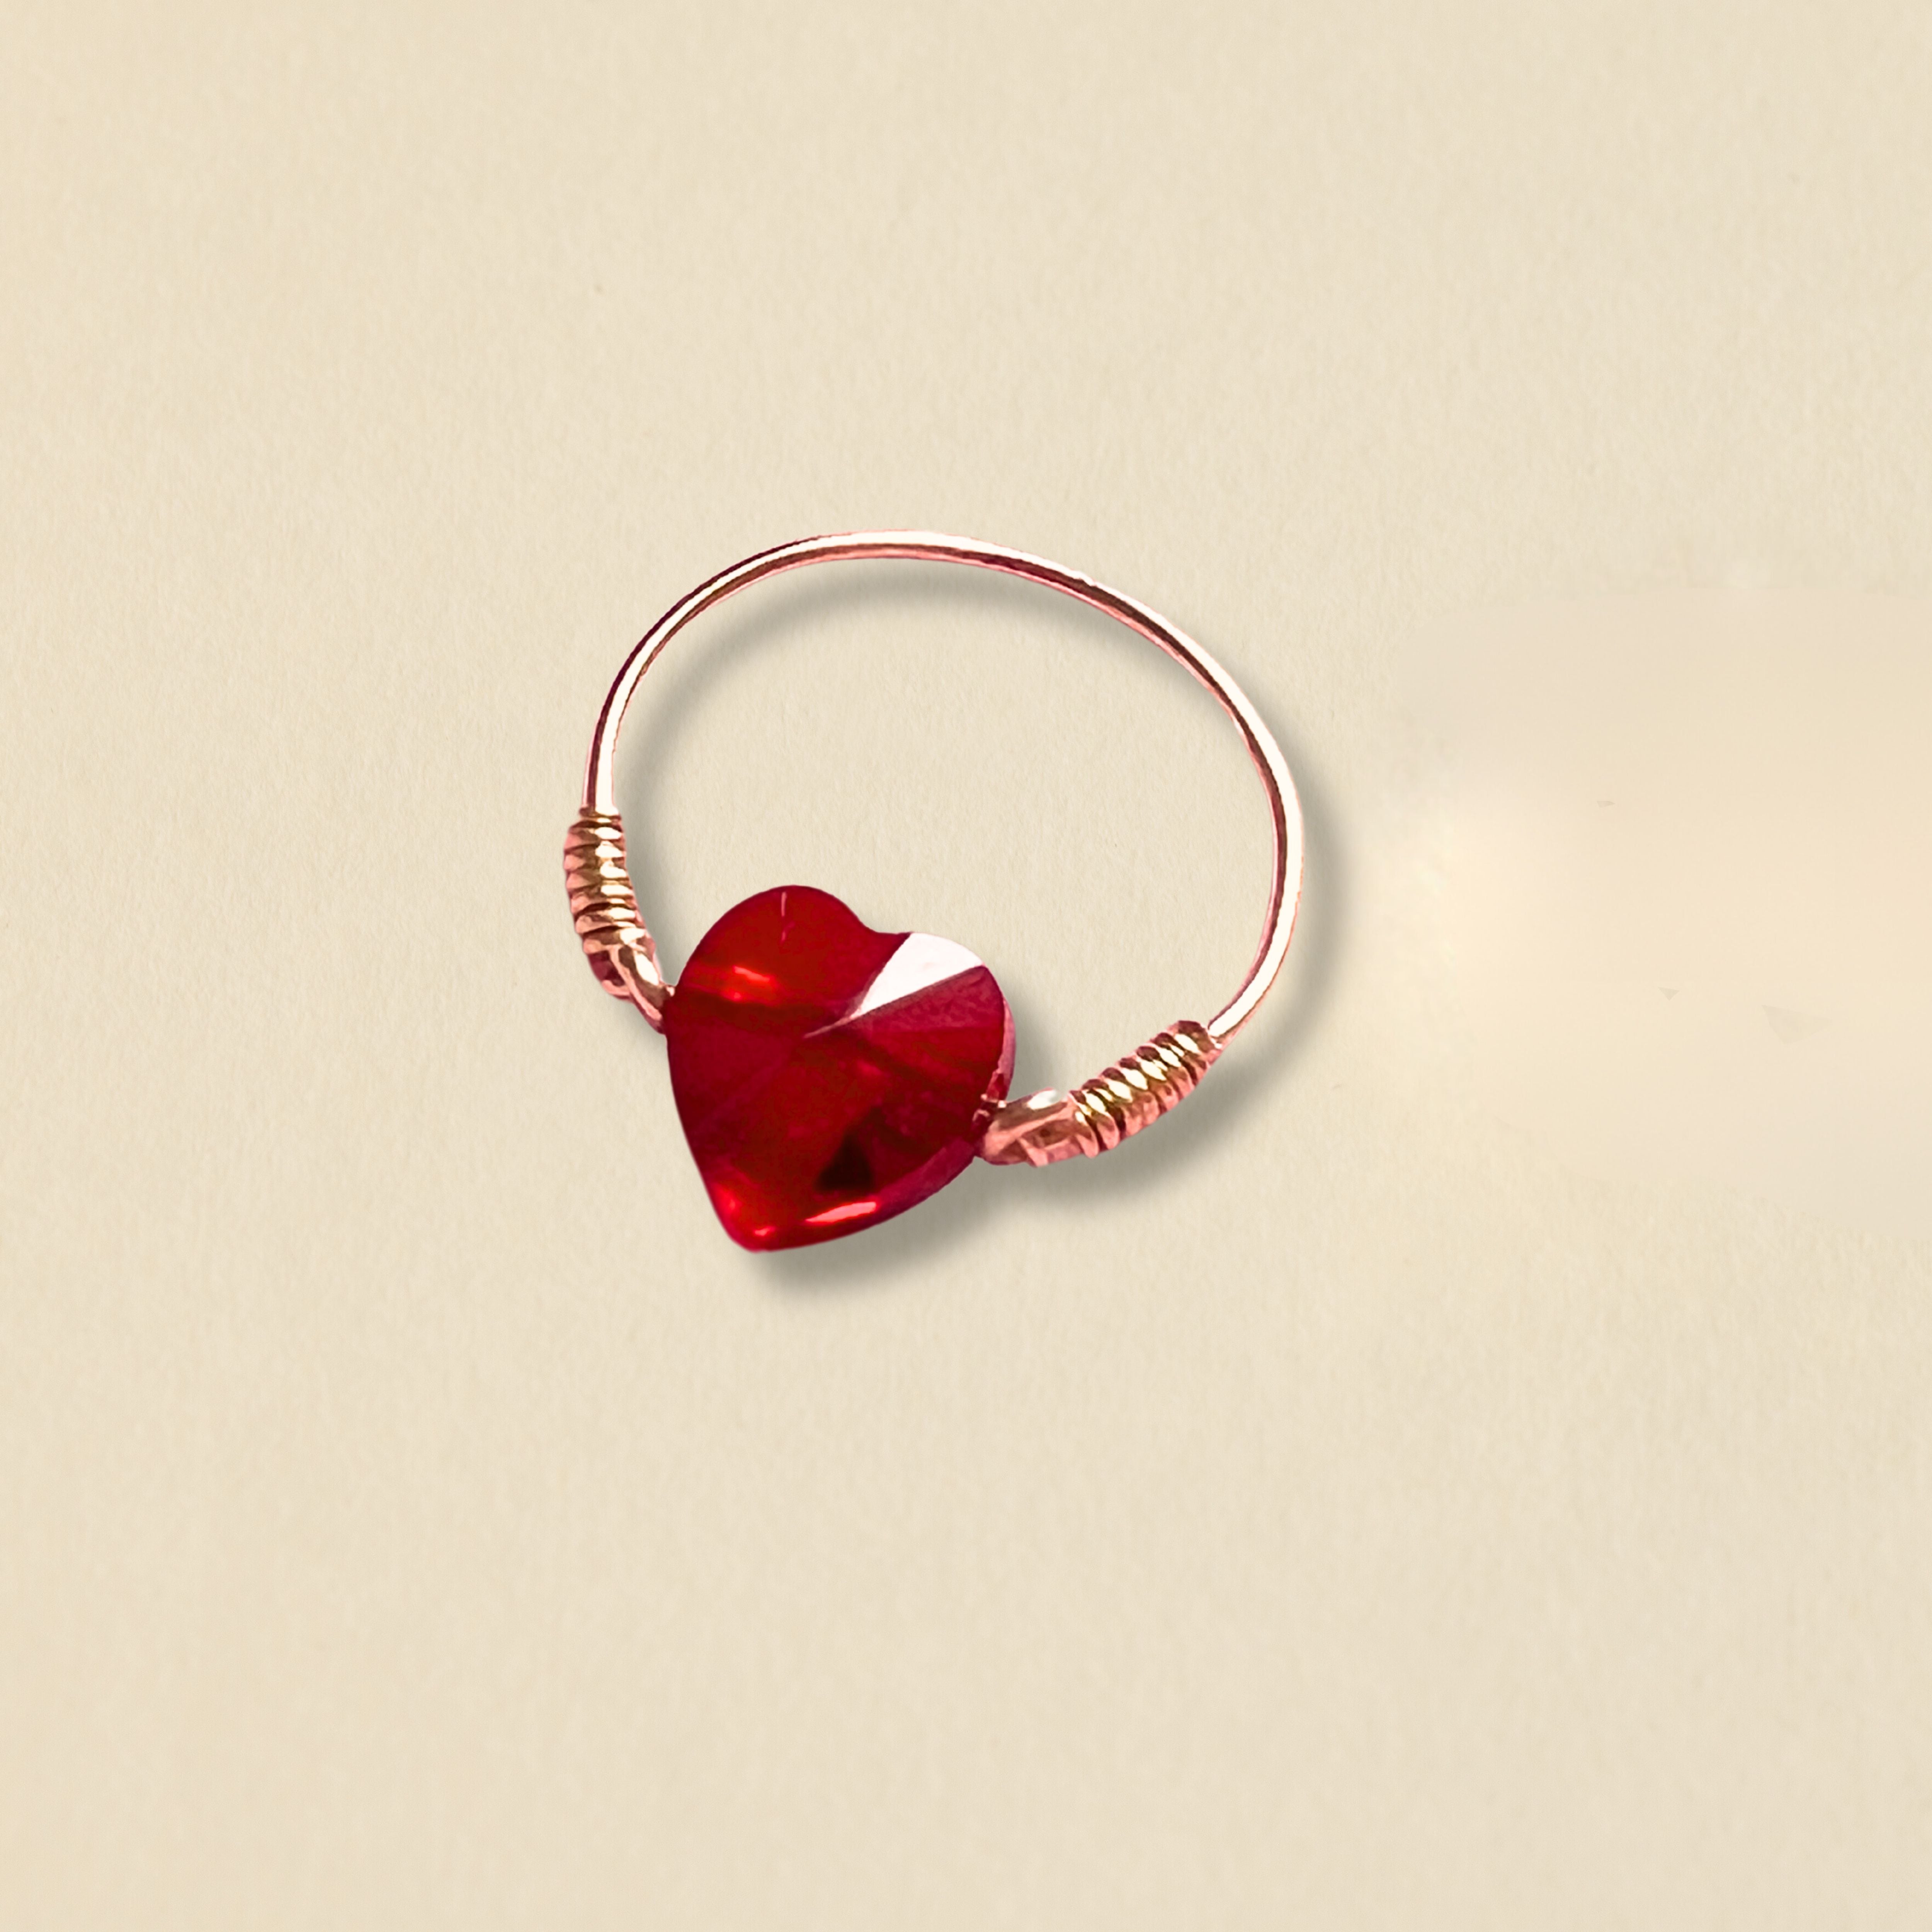 NEW - Candy Heart Ring